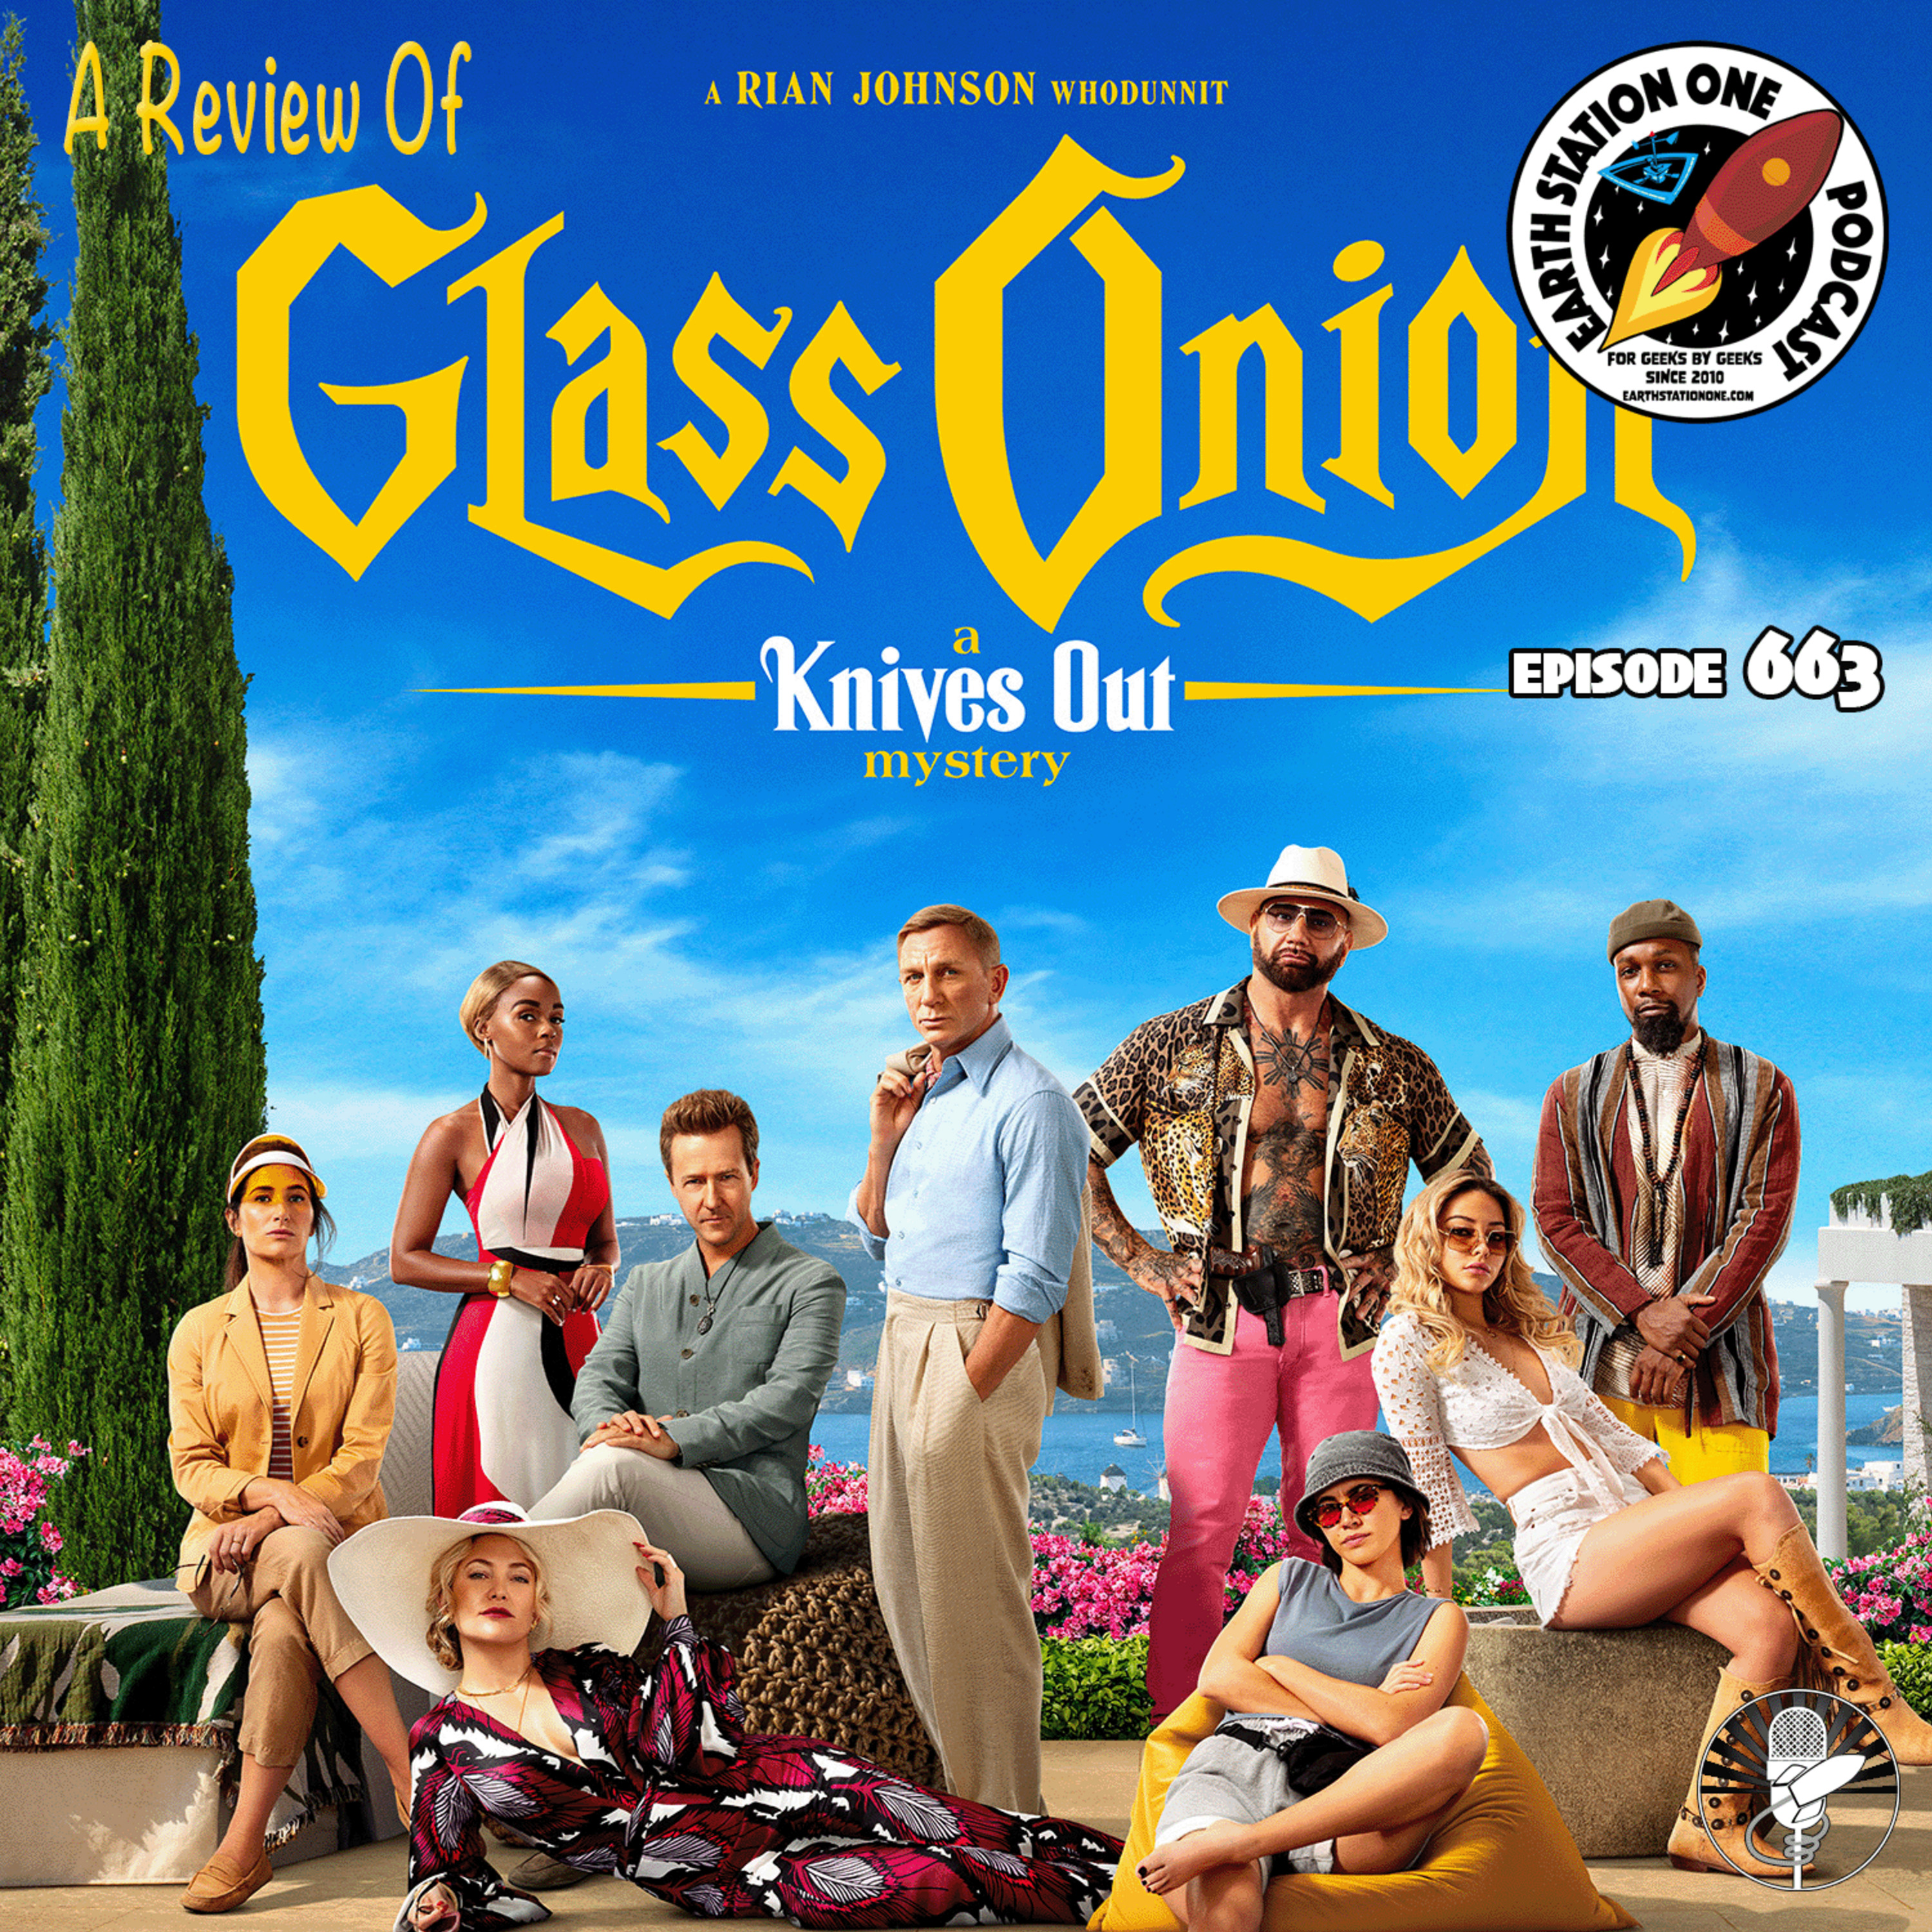 The Earth Station One Podcast - Glass Onion Movie Review